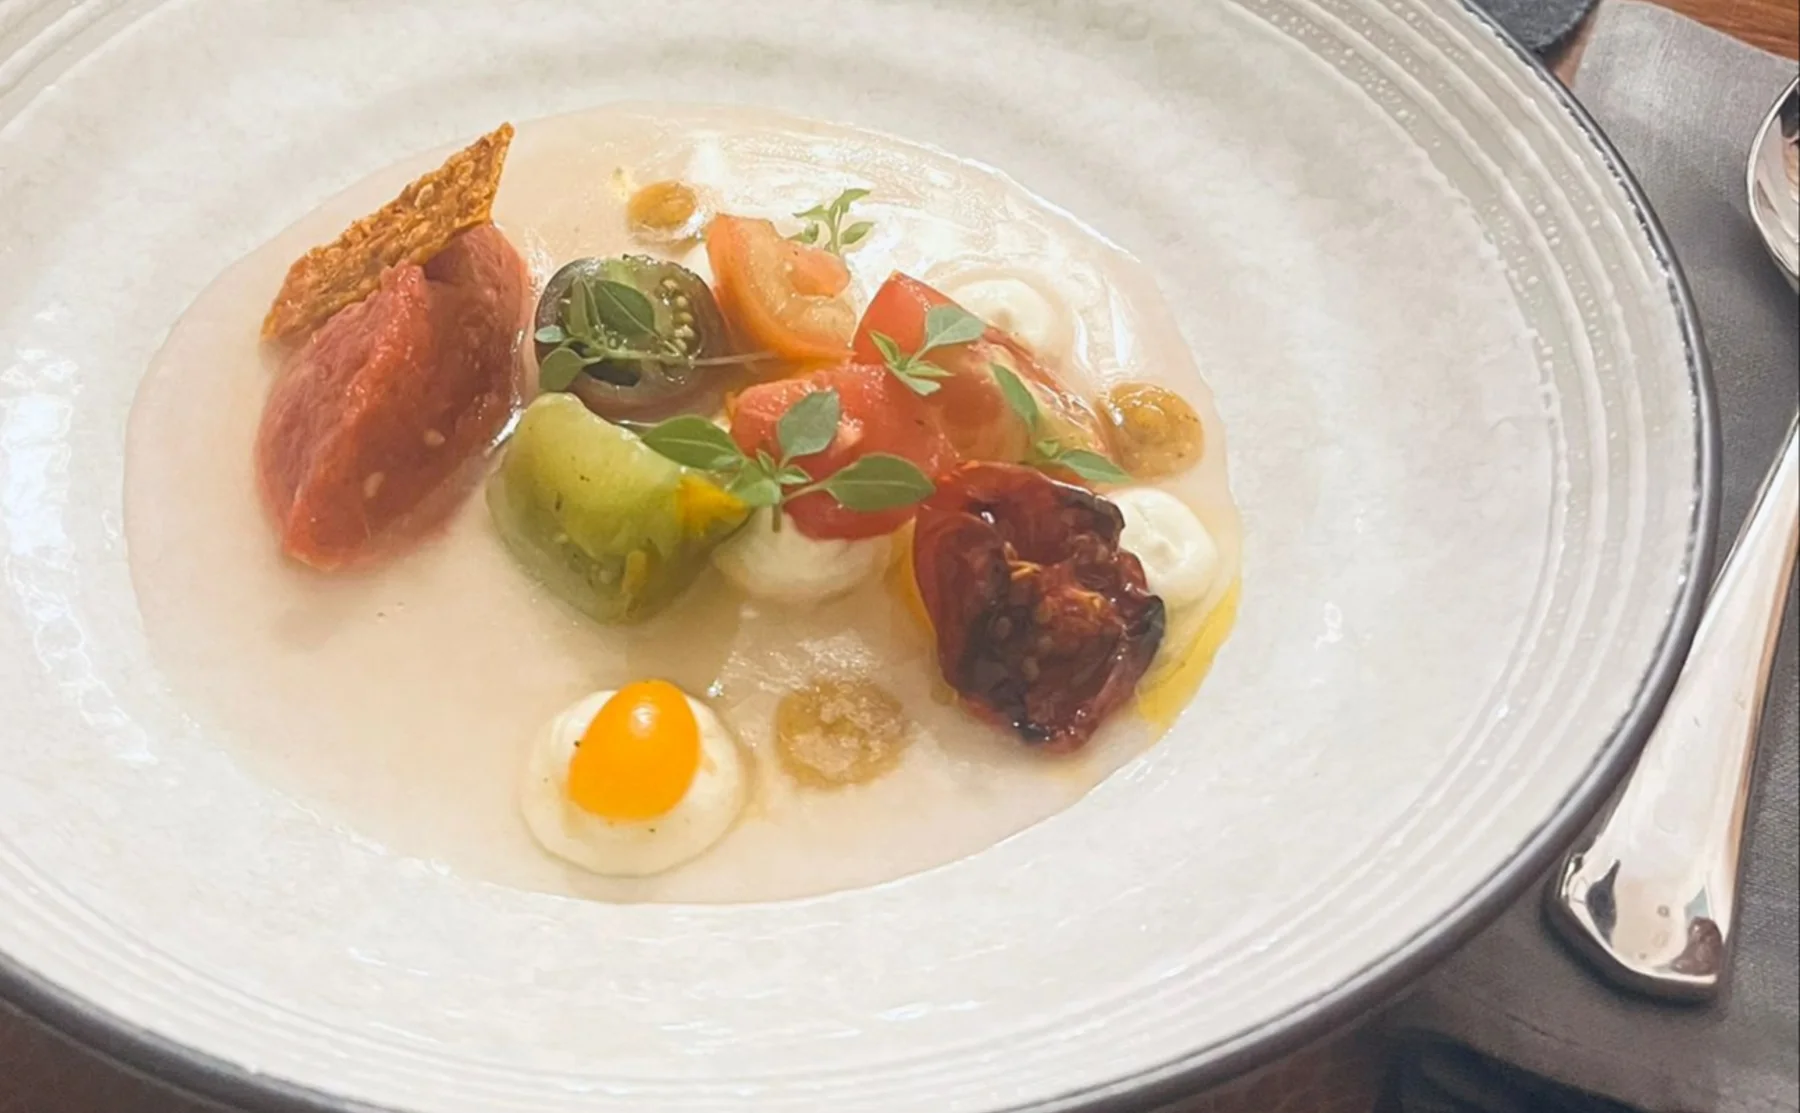 7 Course Tasting Menu at Eleven98's Chef's Table - Hackney - 1522038